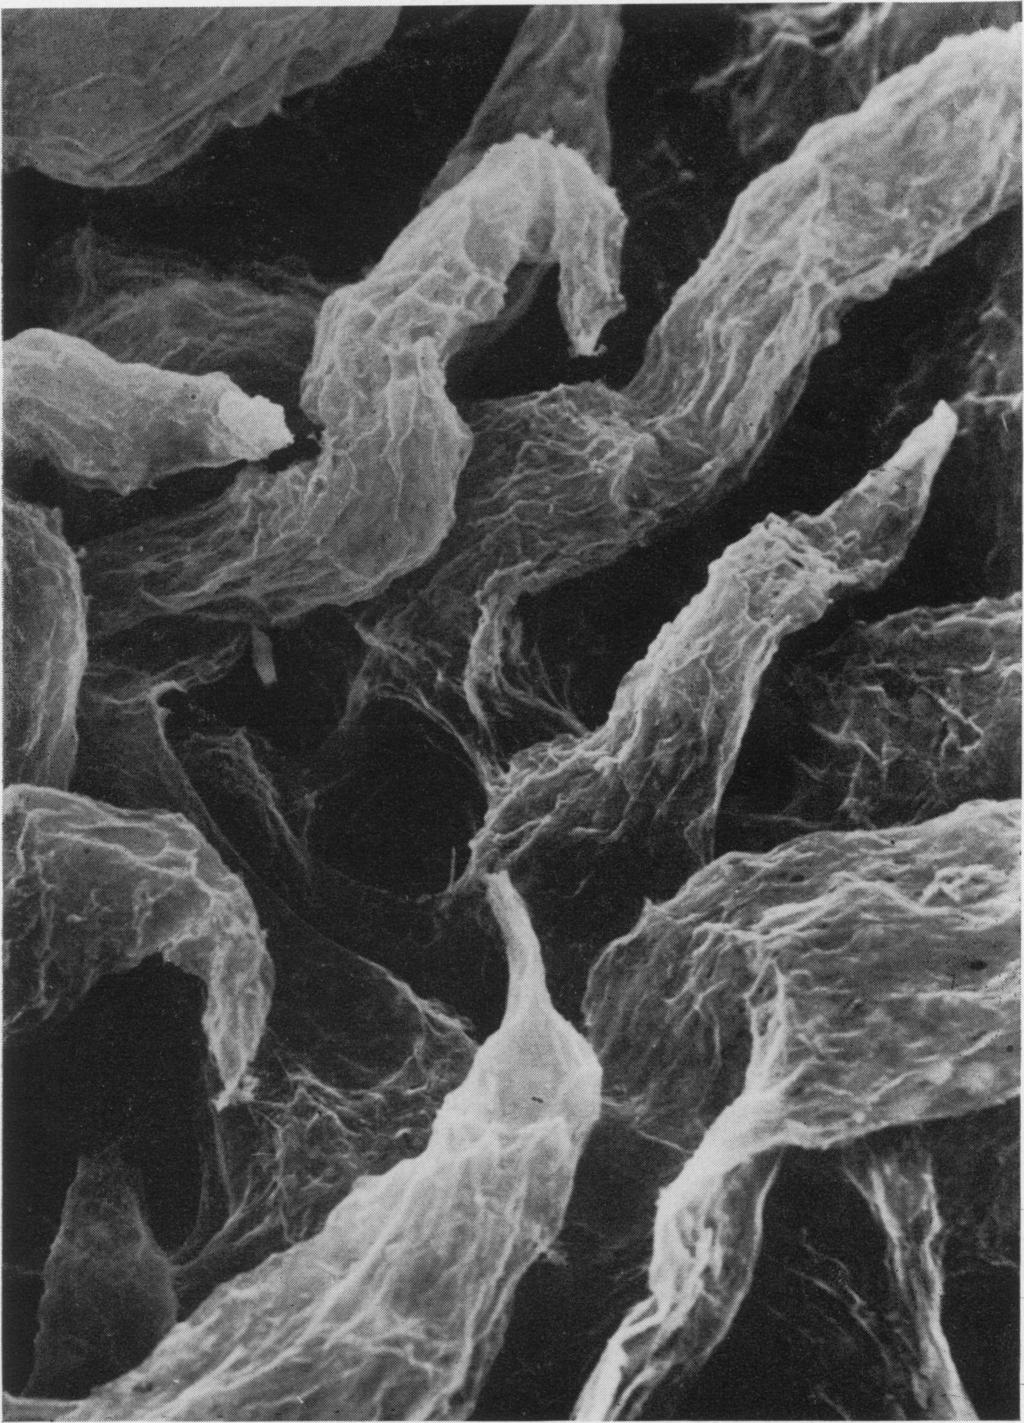 477 Scanning and transmission electron microscopic studies of human intestinal mucosa Gut: first published as 10.1136/gut.11.6.471 on 1 June 1970. Downloaded from http://gut.bmj.com/ Fig.